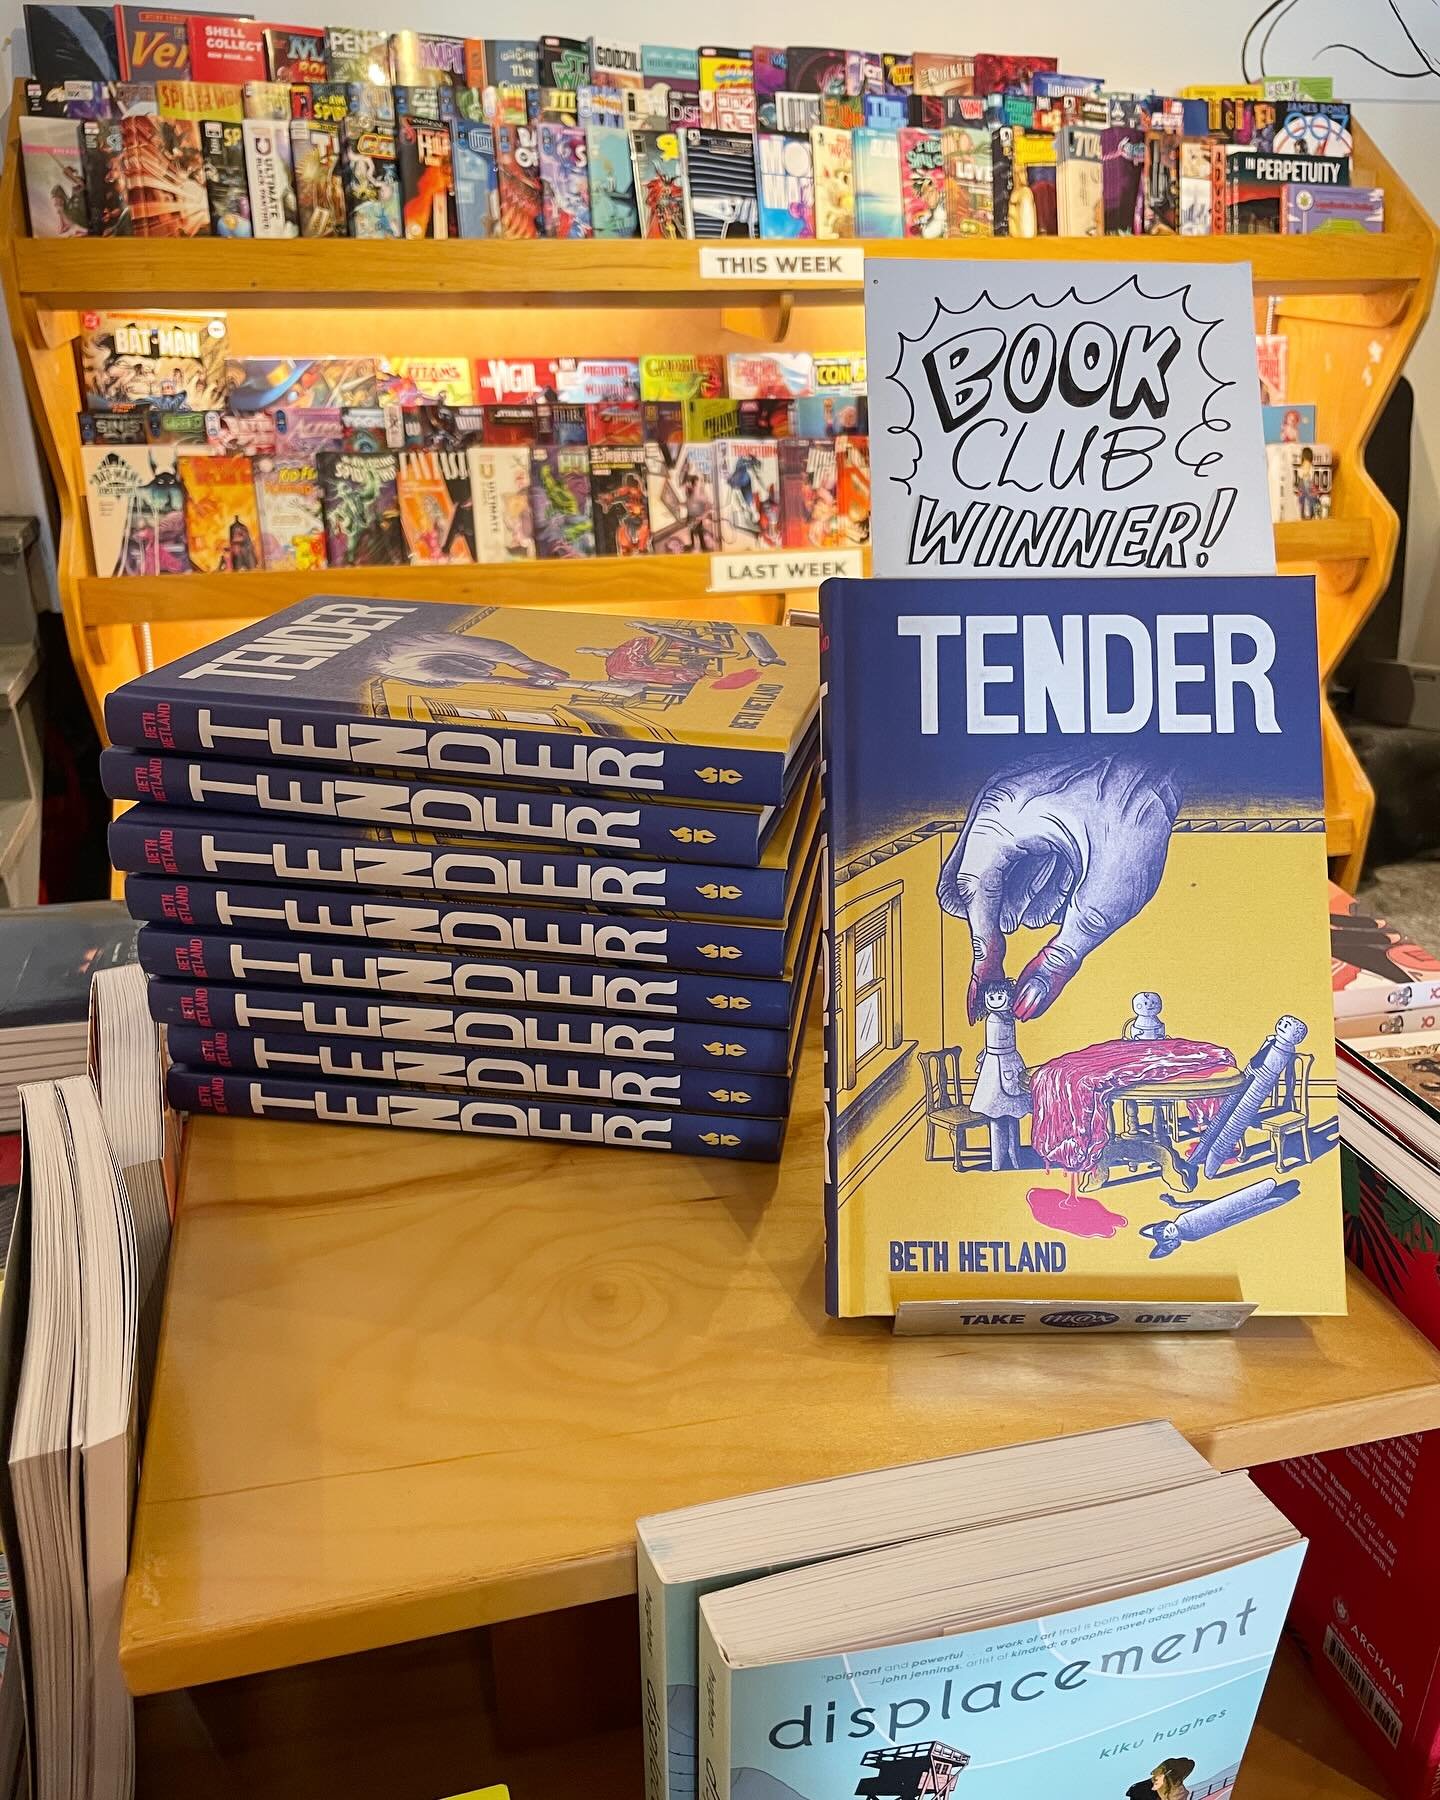 TODAY! We&rsquo;re talking TENDER with @bethhetland for #GRAPHICNOVELCLUB ! Tune in 10 am PST with your Q&rsquo;s, or catch the stream on Youtube/ wherever you get your podcasts 🥩